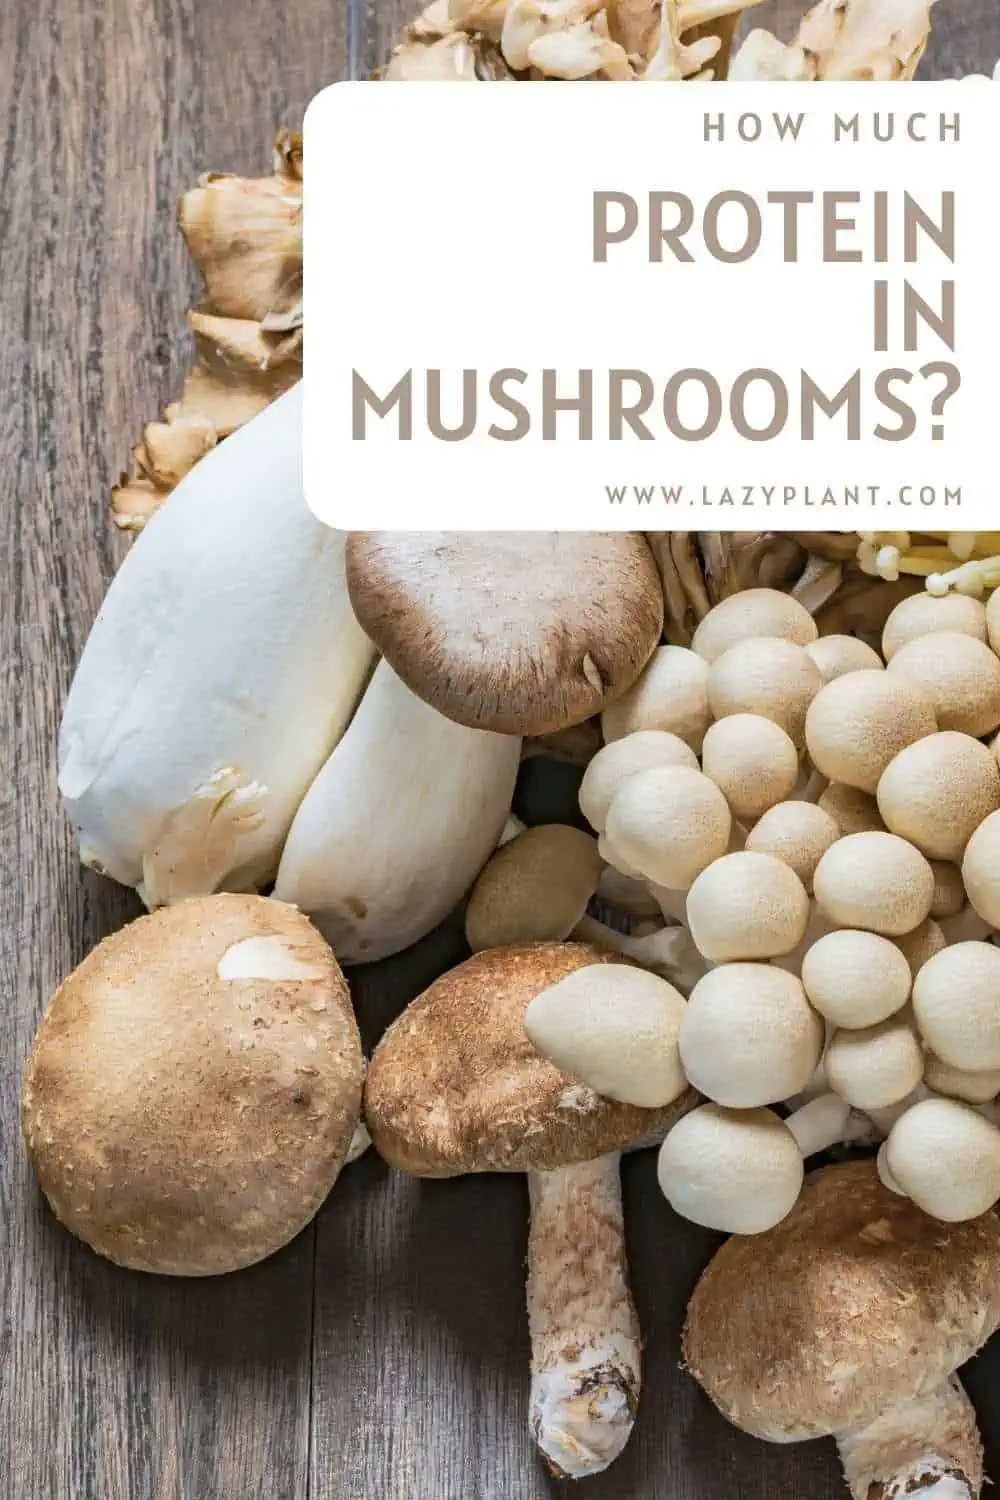 How much protein in mushrooms?